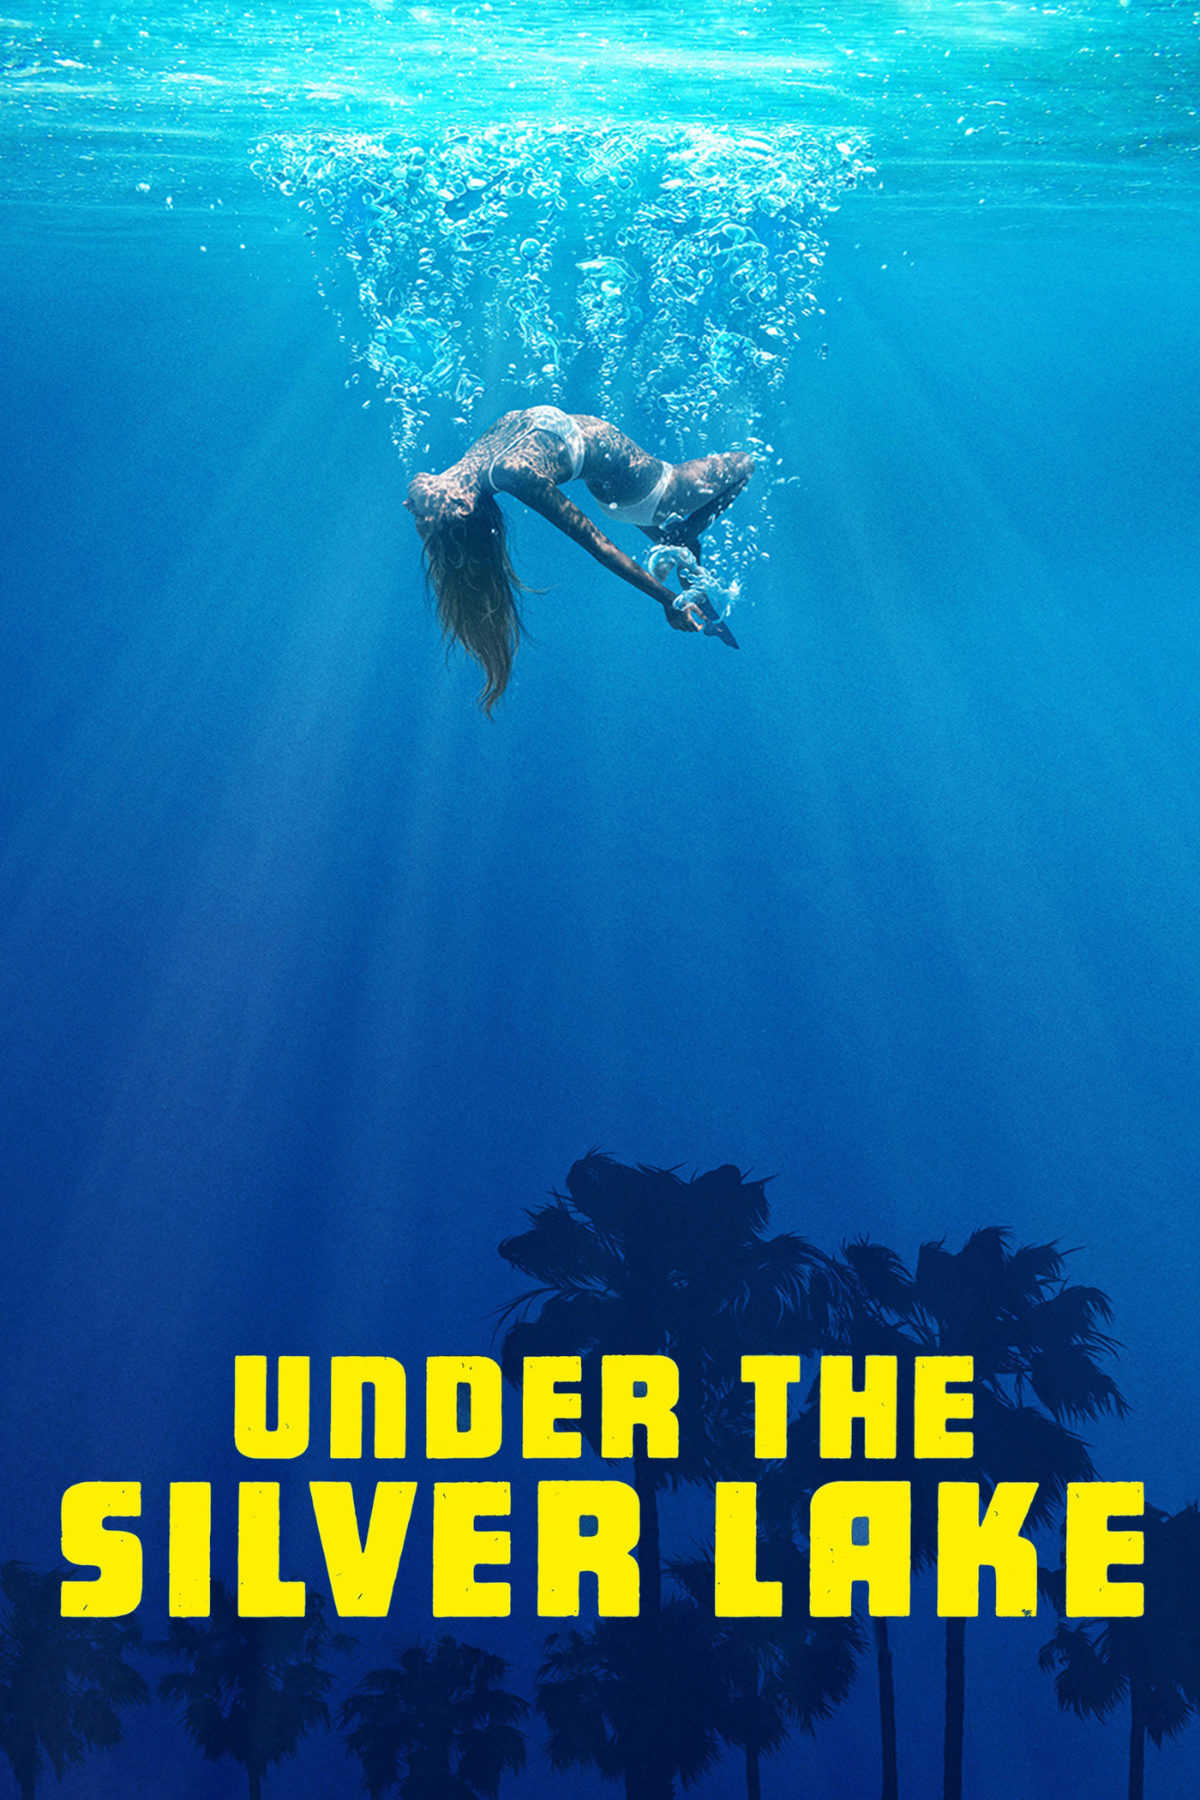 under the silver lake movie 2018 a24 film